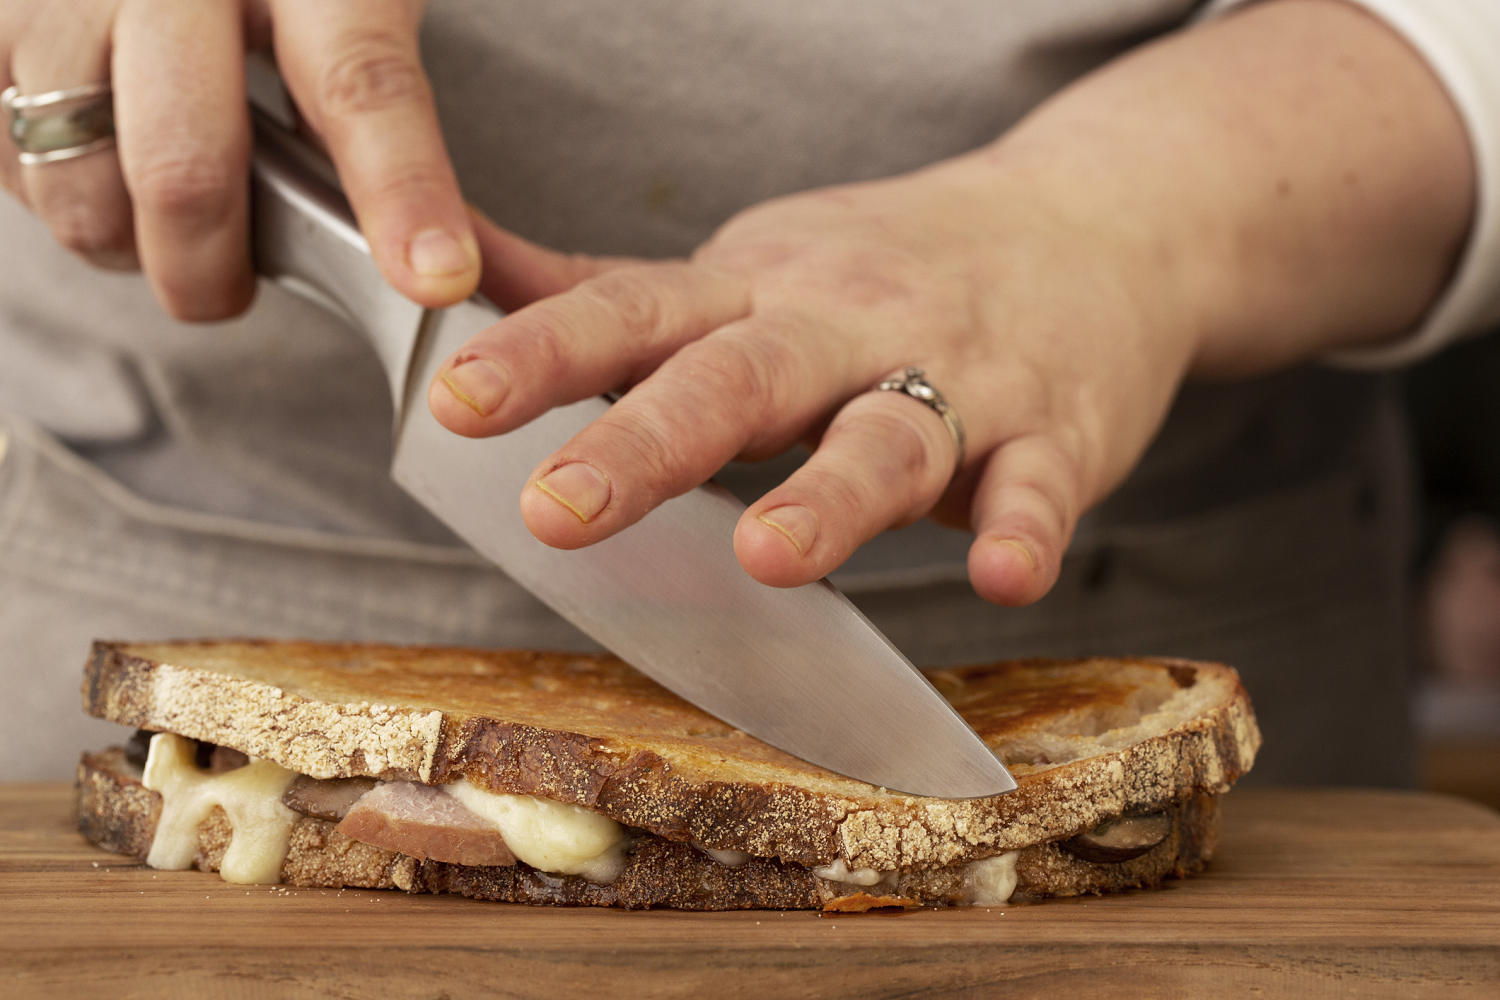 This sandwich-slicing hack is dividing the internet, but it’s kind of genius